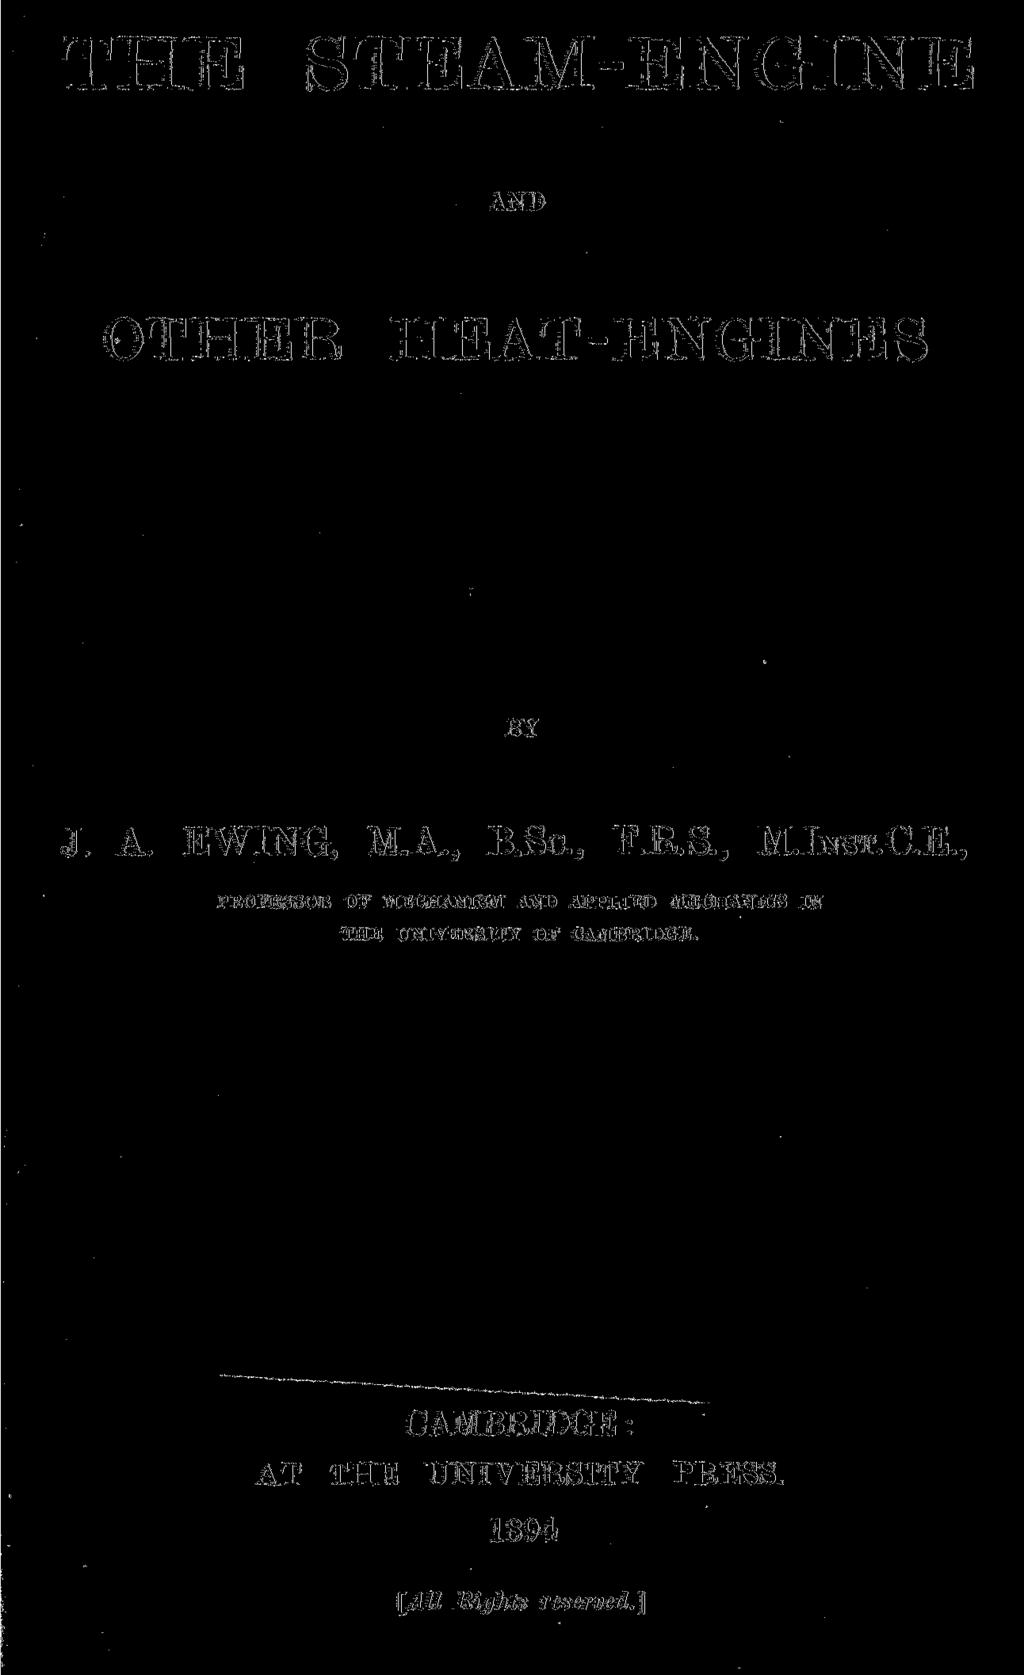 THE STEAM-ENGINE AND OTHEE HEAT-ENGINES BY J. A. EWING, M.A., B.Sc, F.E.S., M.INST.C.E., PROFESSOR OF MECHANISM AND APPLIED MECHANICS IN THE UNIVERSITY OF CAMBRIDGE.